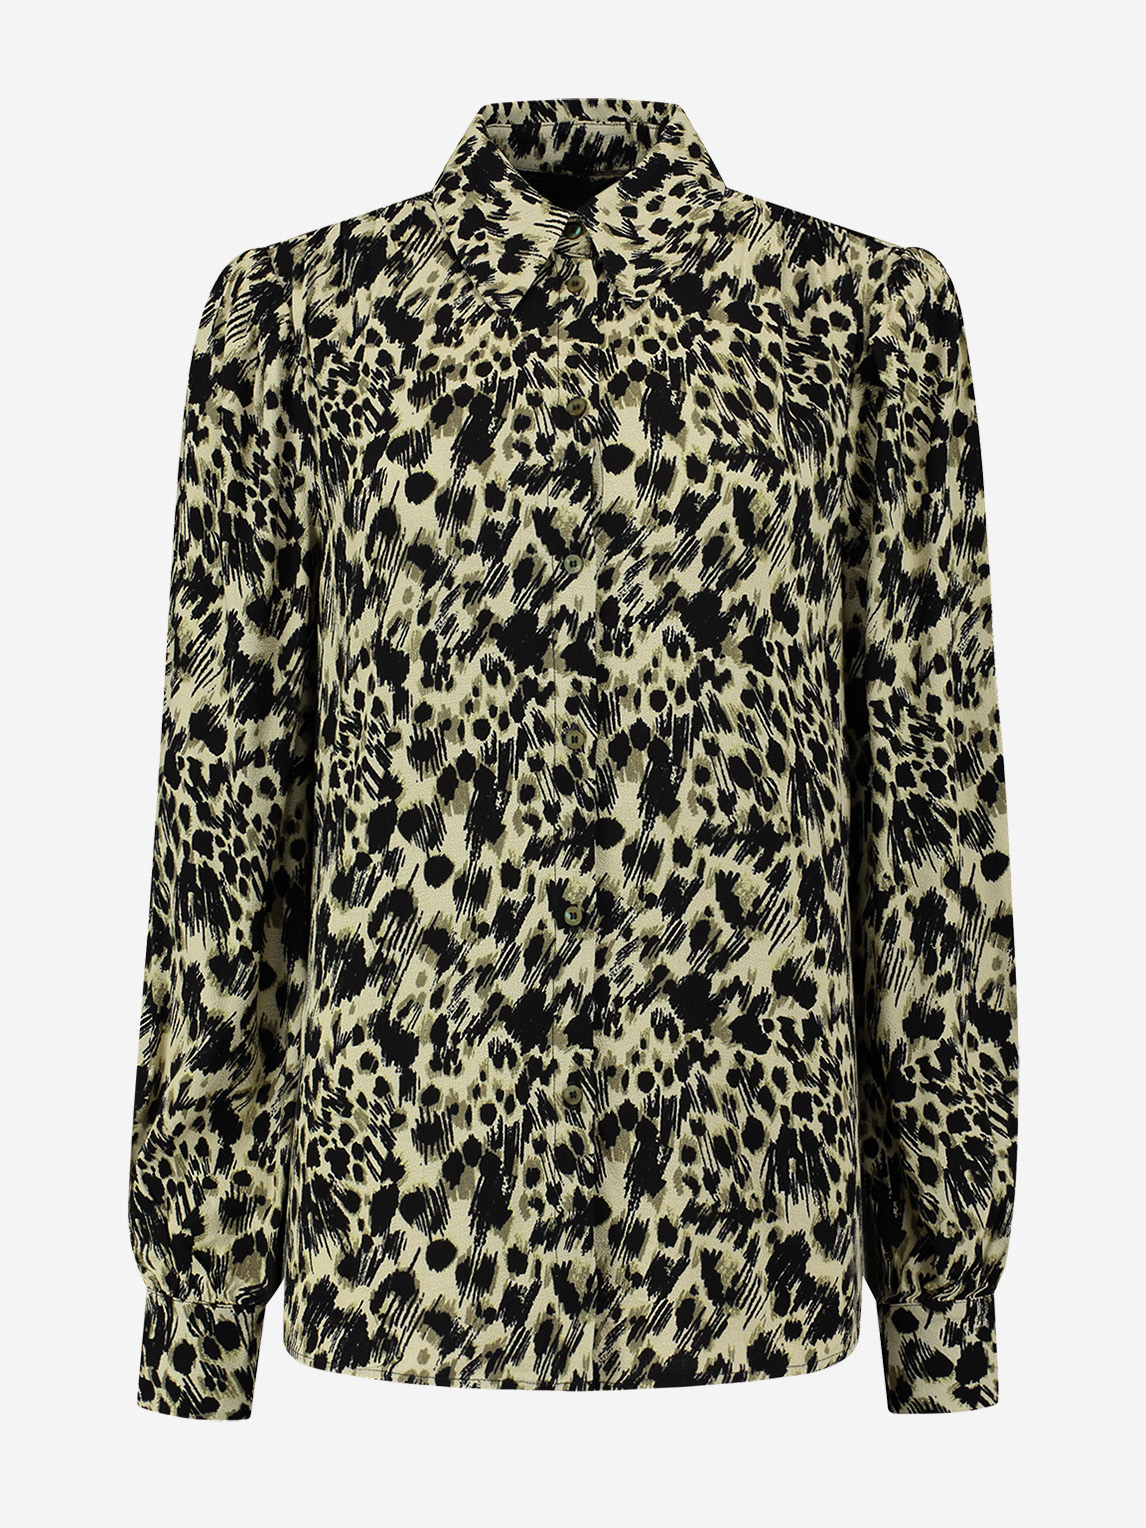 Leopard Blouse with puff sleeves